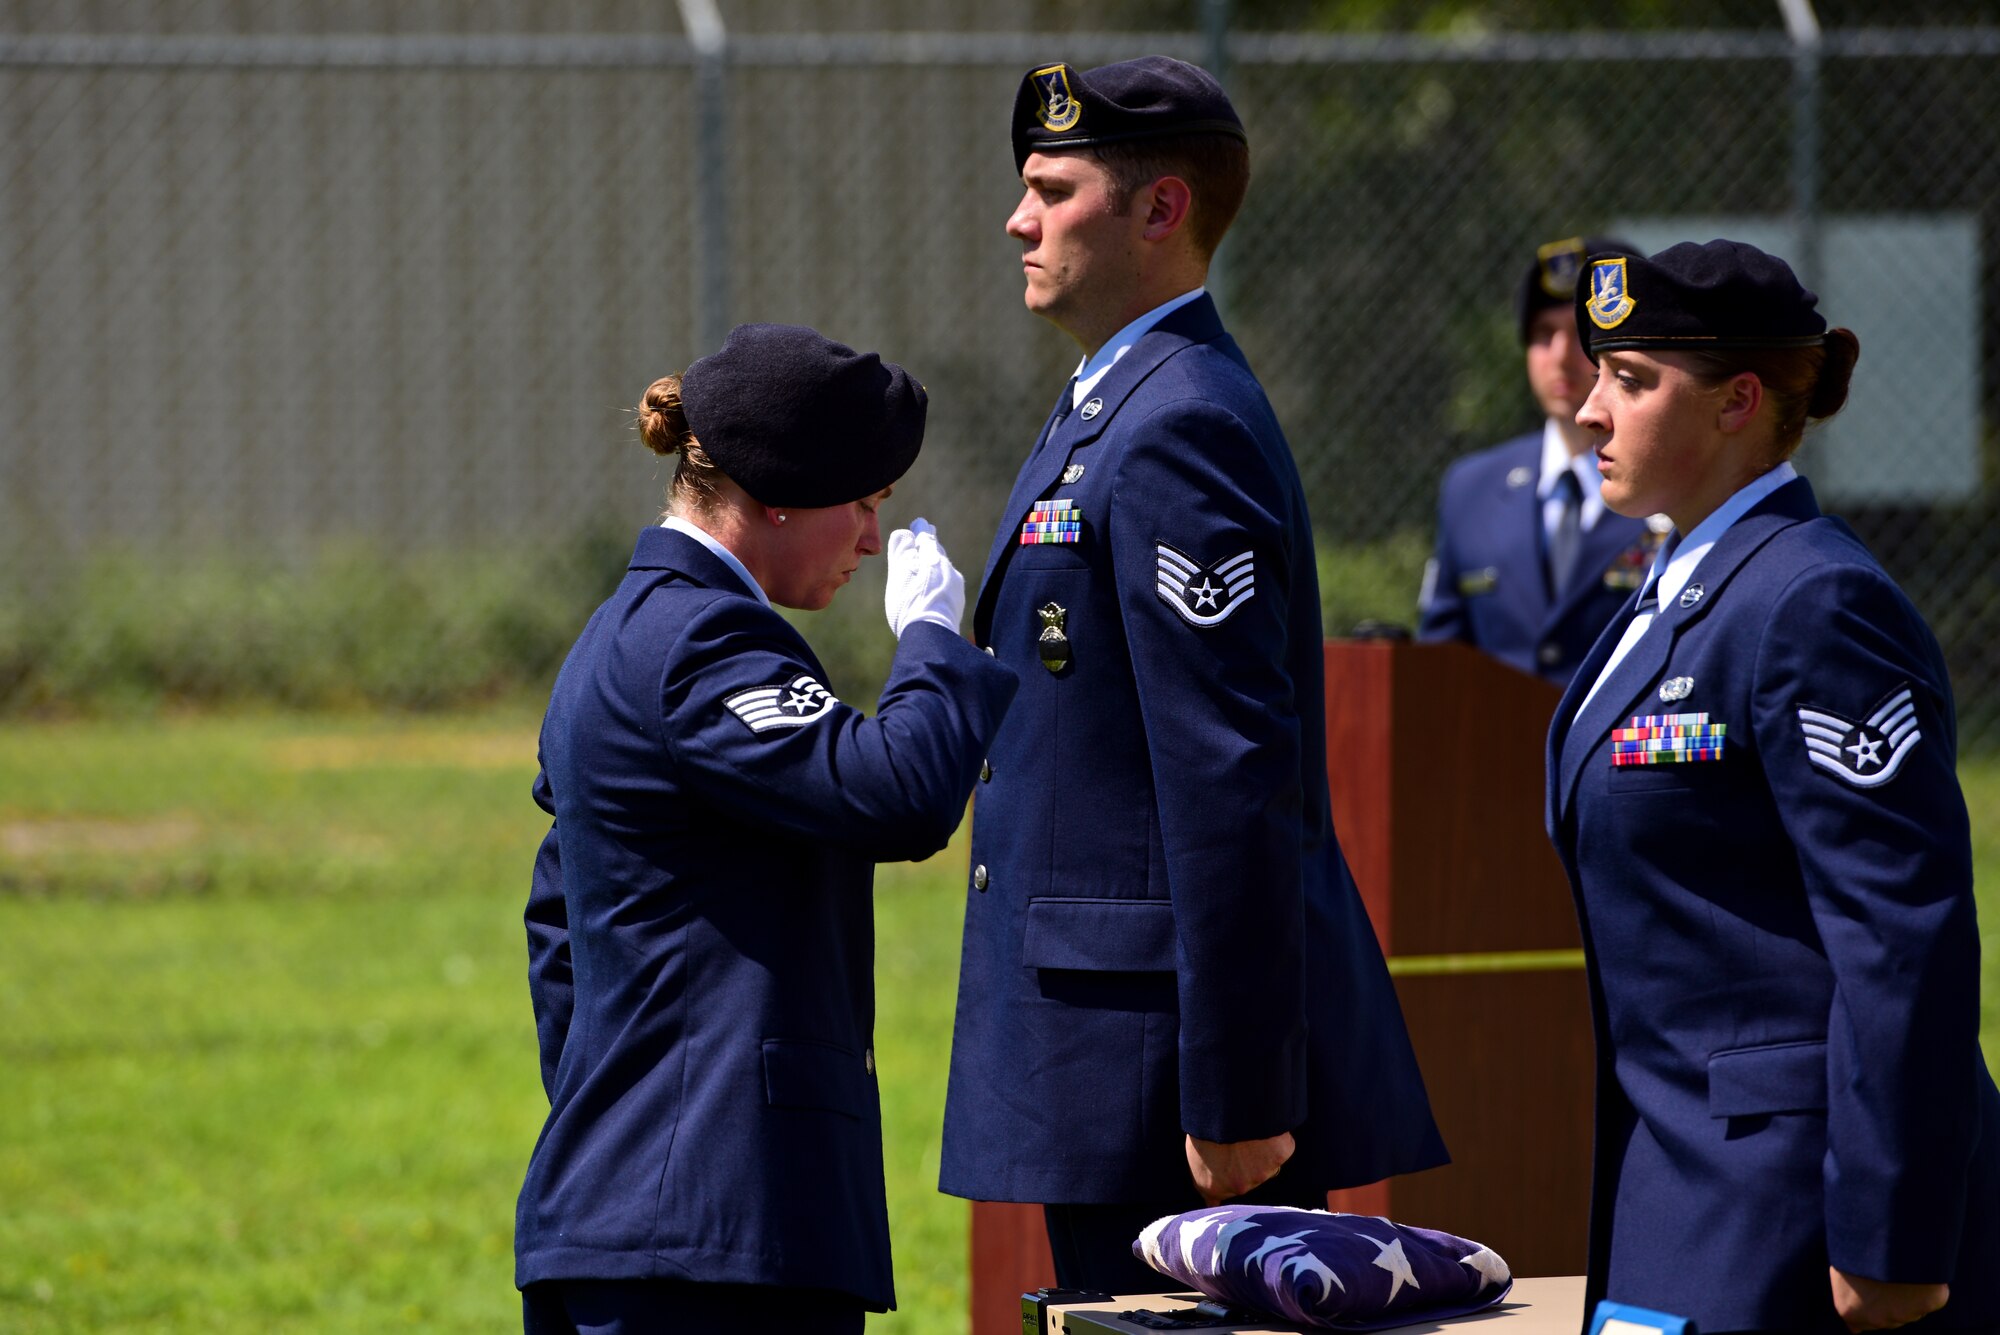 U.S. Air Force Staff Sgt. Katelyn Grau, 325th Security Forces Squadron member, renders a final salute to military working dog (MWD) Jack during his memorial service at Tyndall air Force Base, Fla., Sept. 7, 2018. Jack was an explosives and patrol dog who shared a special bond with his handlers. MWDs enhance Security Forces capabilities to protect resources, enforce military laws, suppress drugs, detect explosives and protect installations. (U.S. Air Force photo by Senior Airman Isaiah J. Soliz)